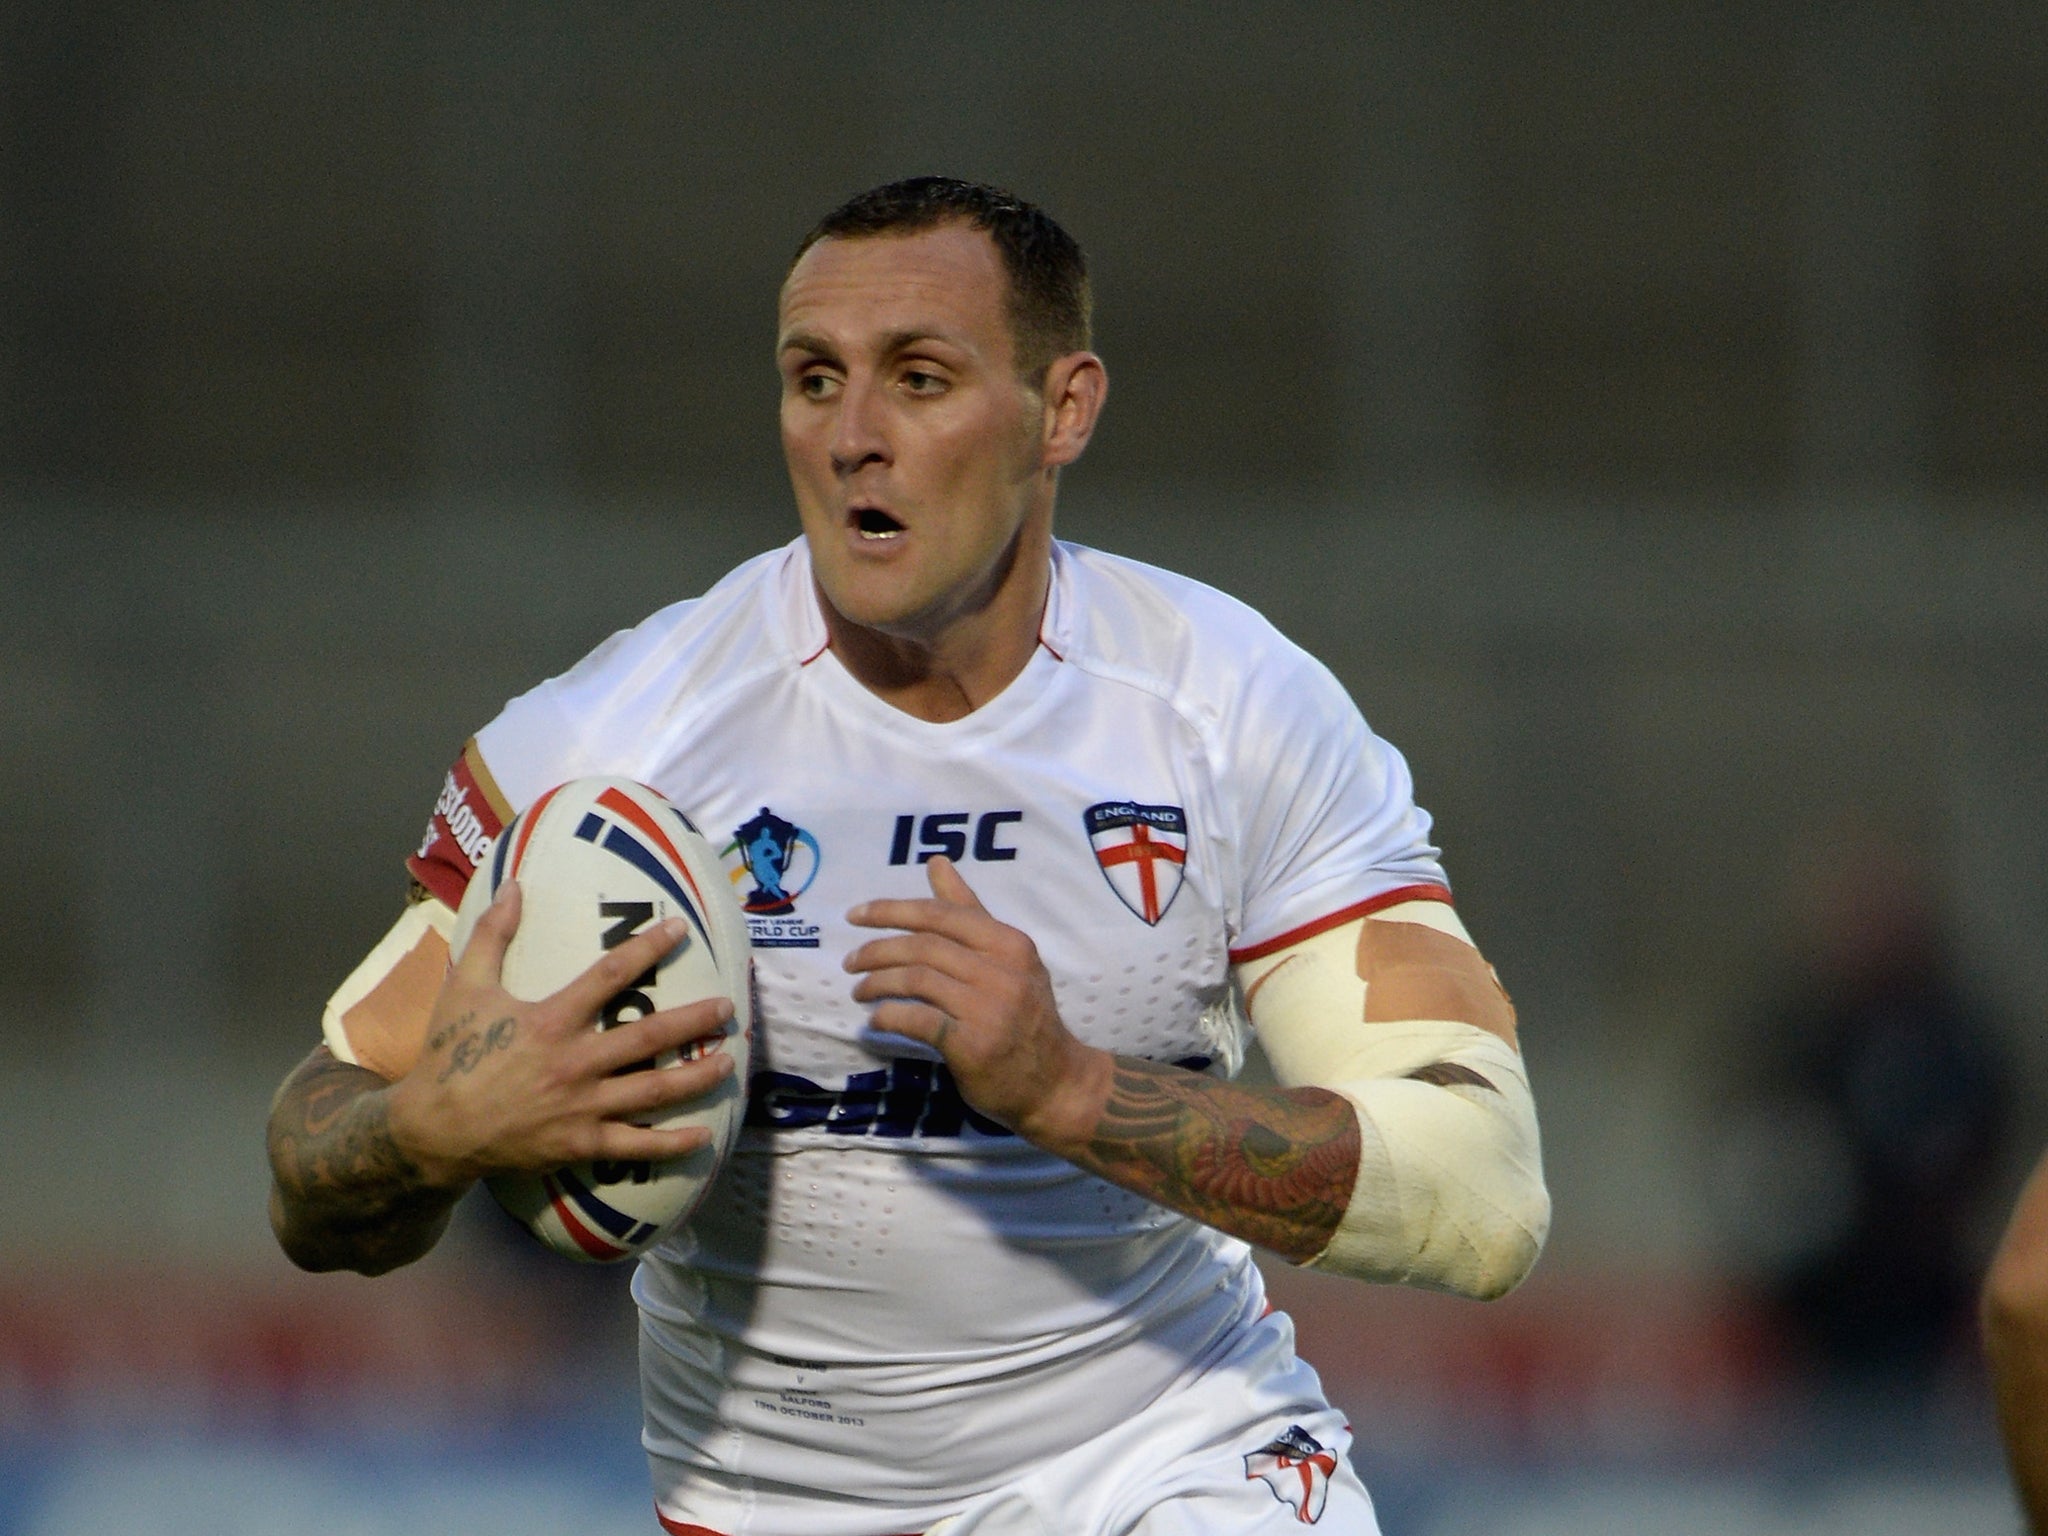 Gareth Hock has been dropped from the England World Cup squad ahead of their opening match against Australia